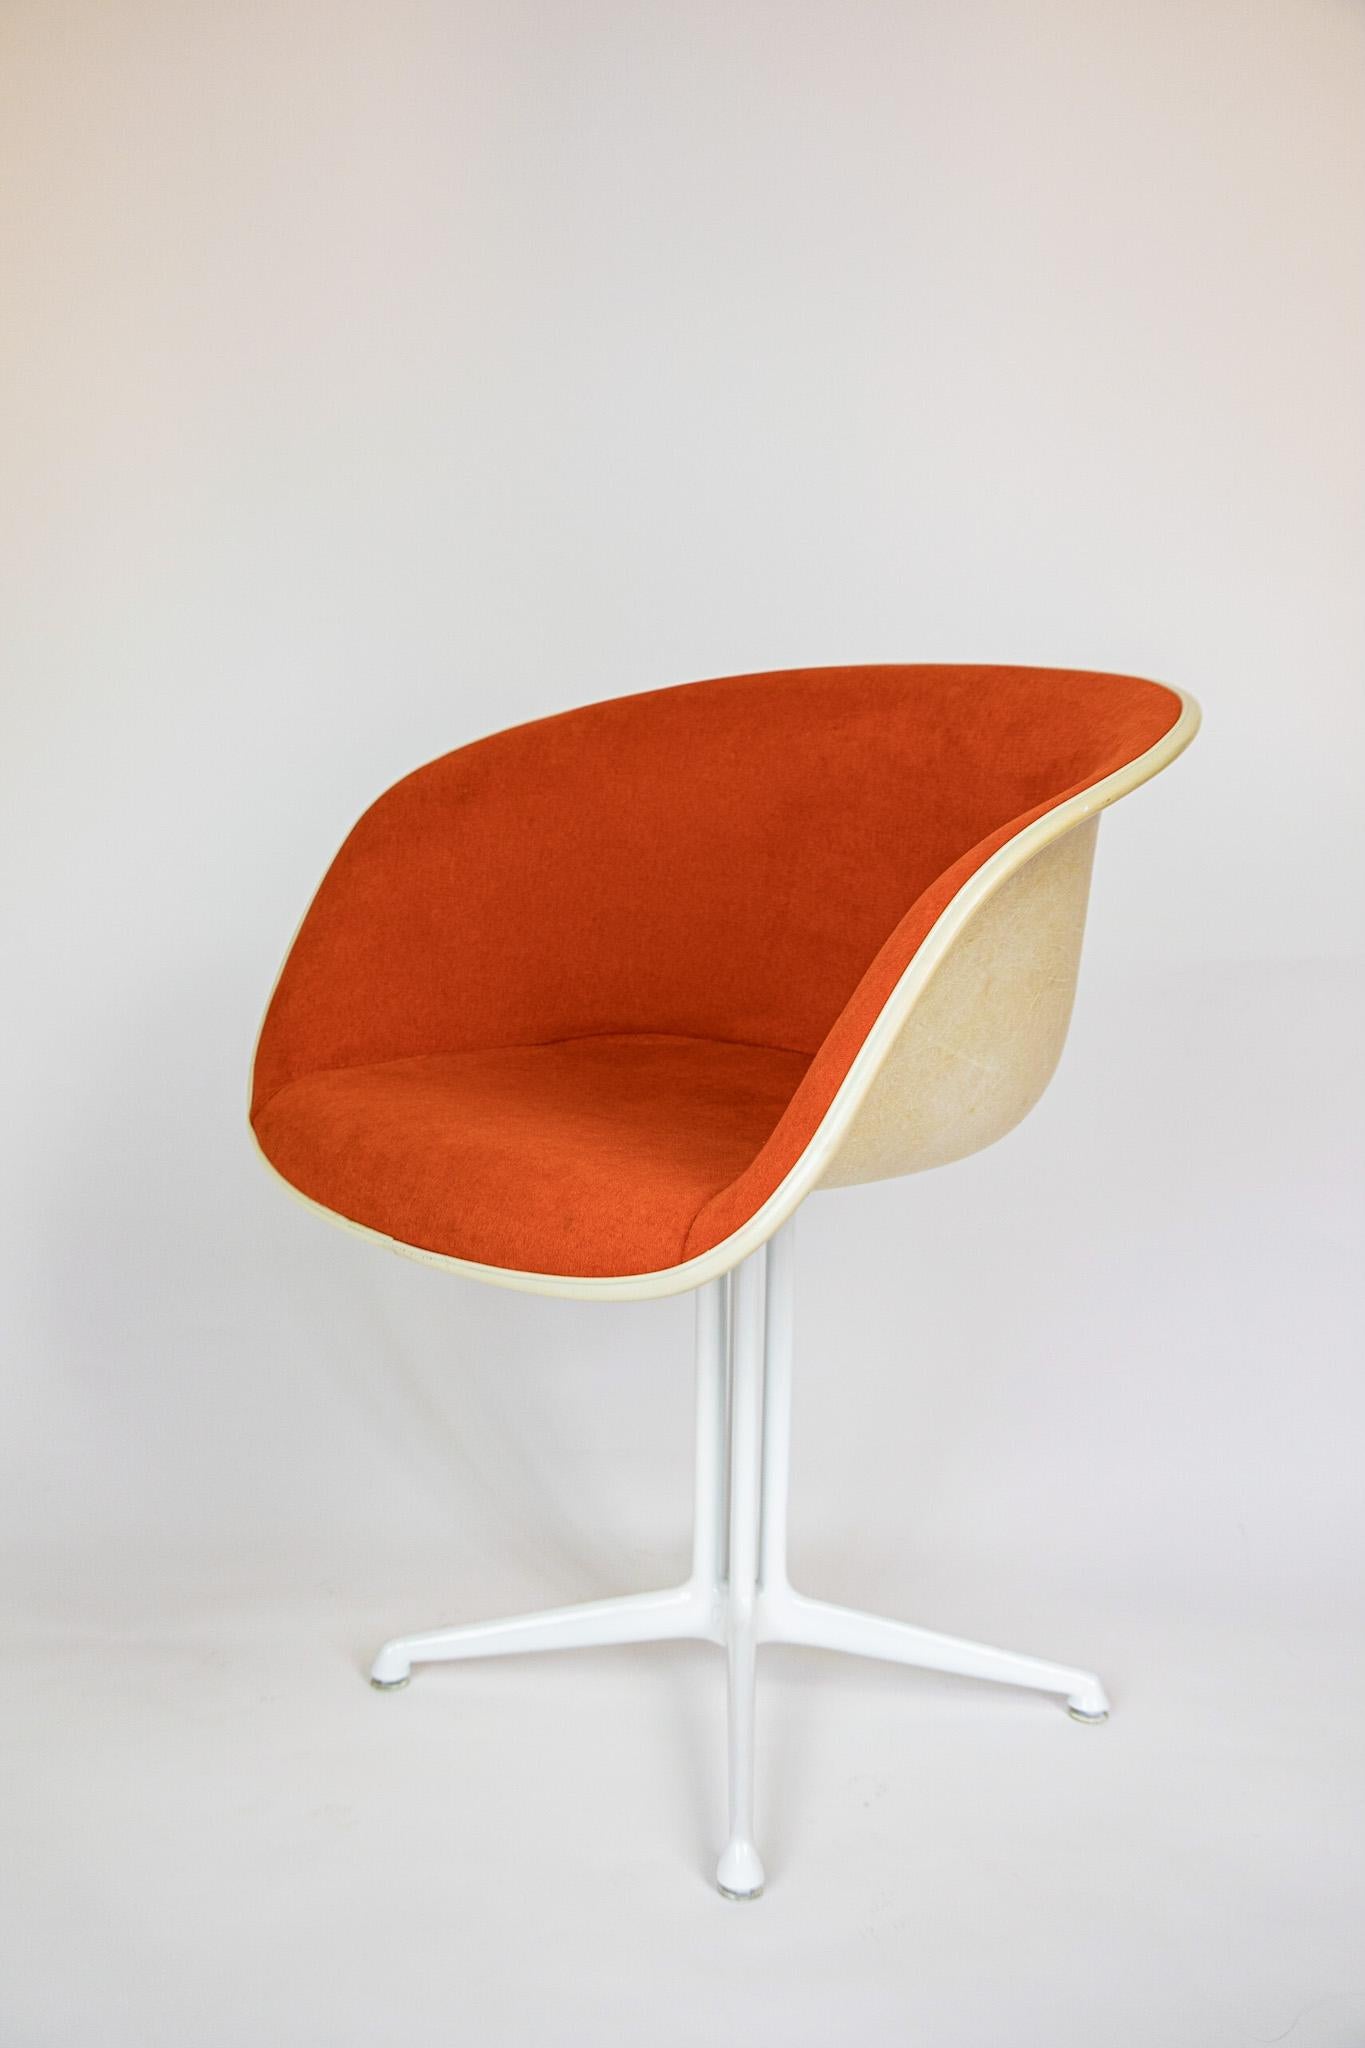 Midcentury dining chairs La Fonda by Eames for Vitra, orange, fiberglass, 1960s.

This lovely set of two La Fonda armchairs are the absolute eye catcher in every stylish room. They are reupholstered with a bright orange fabric and their typical